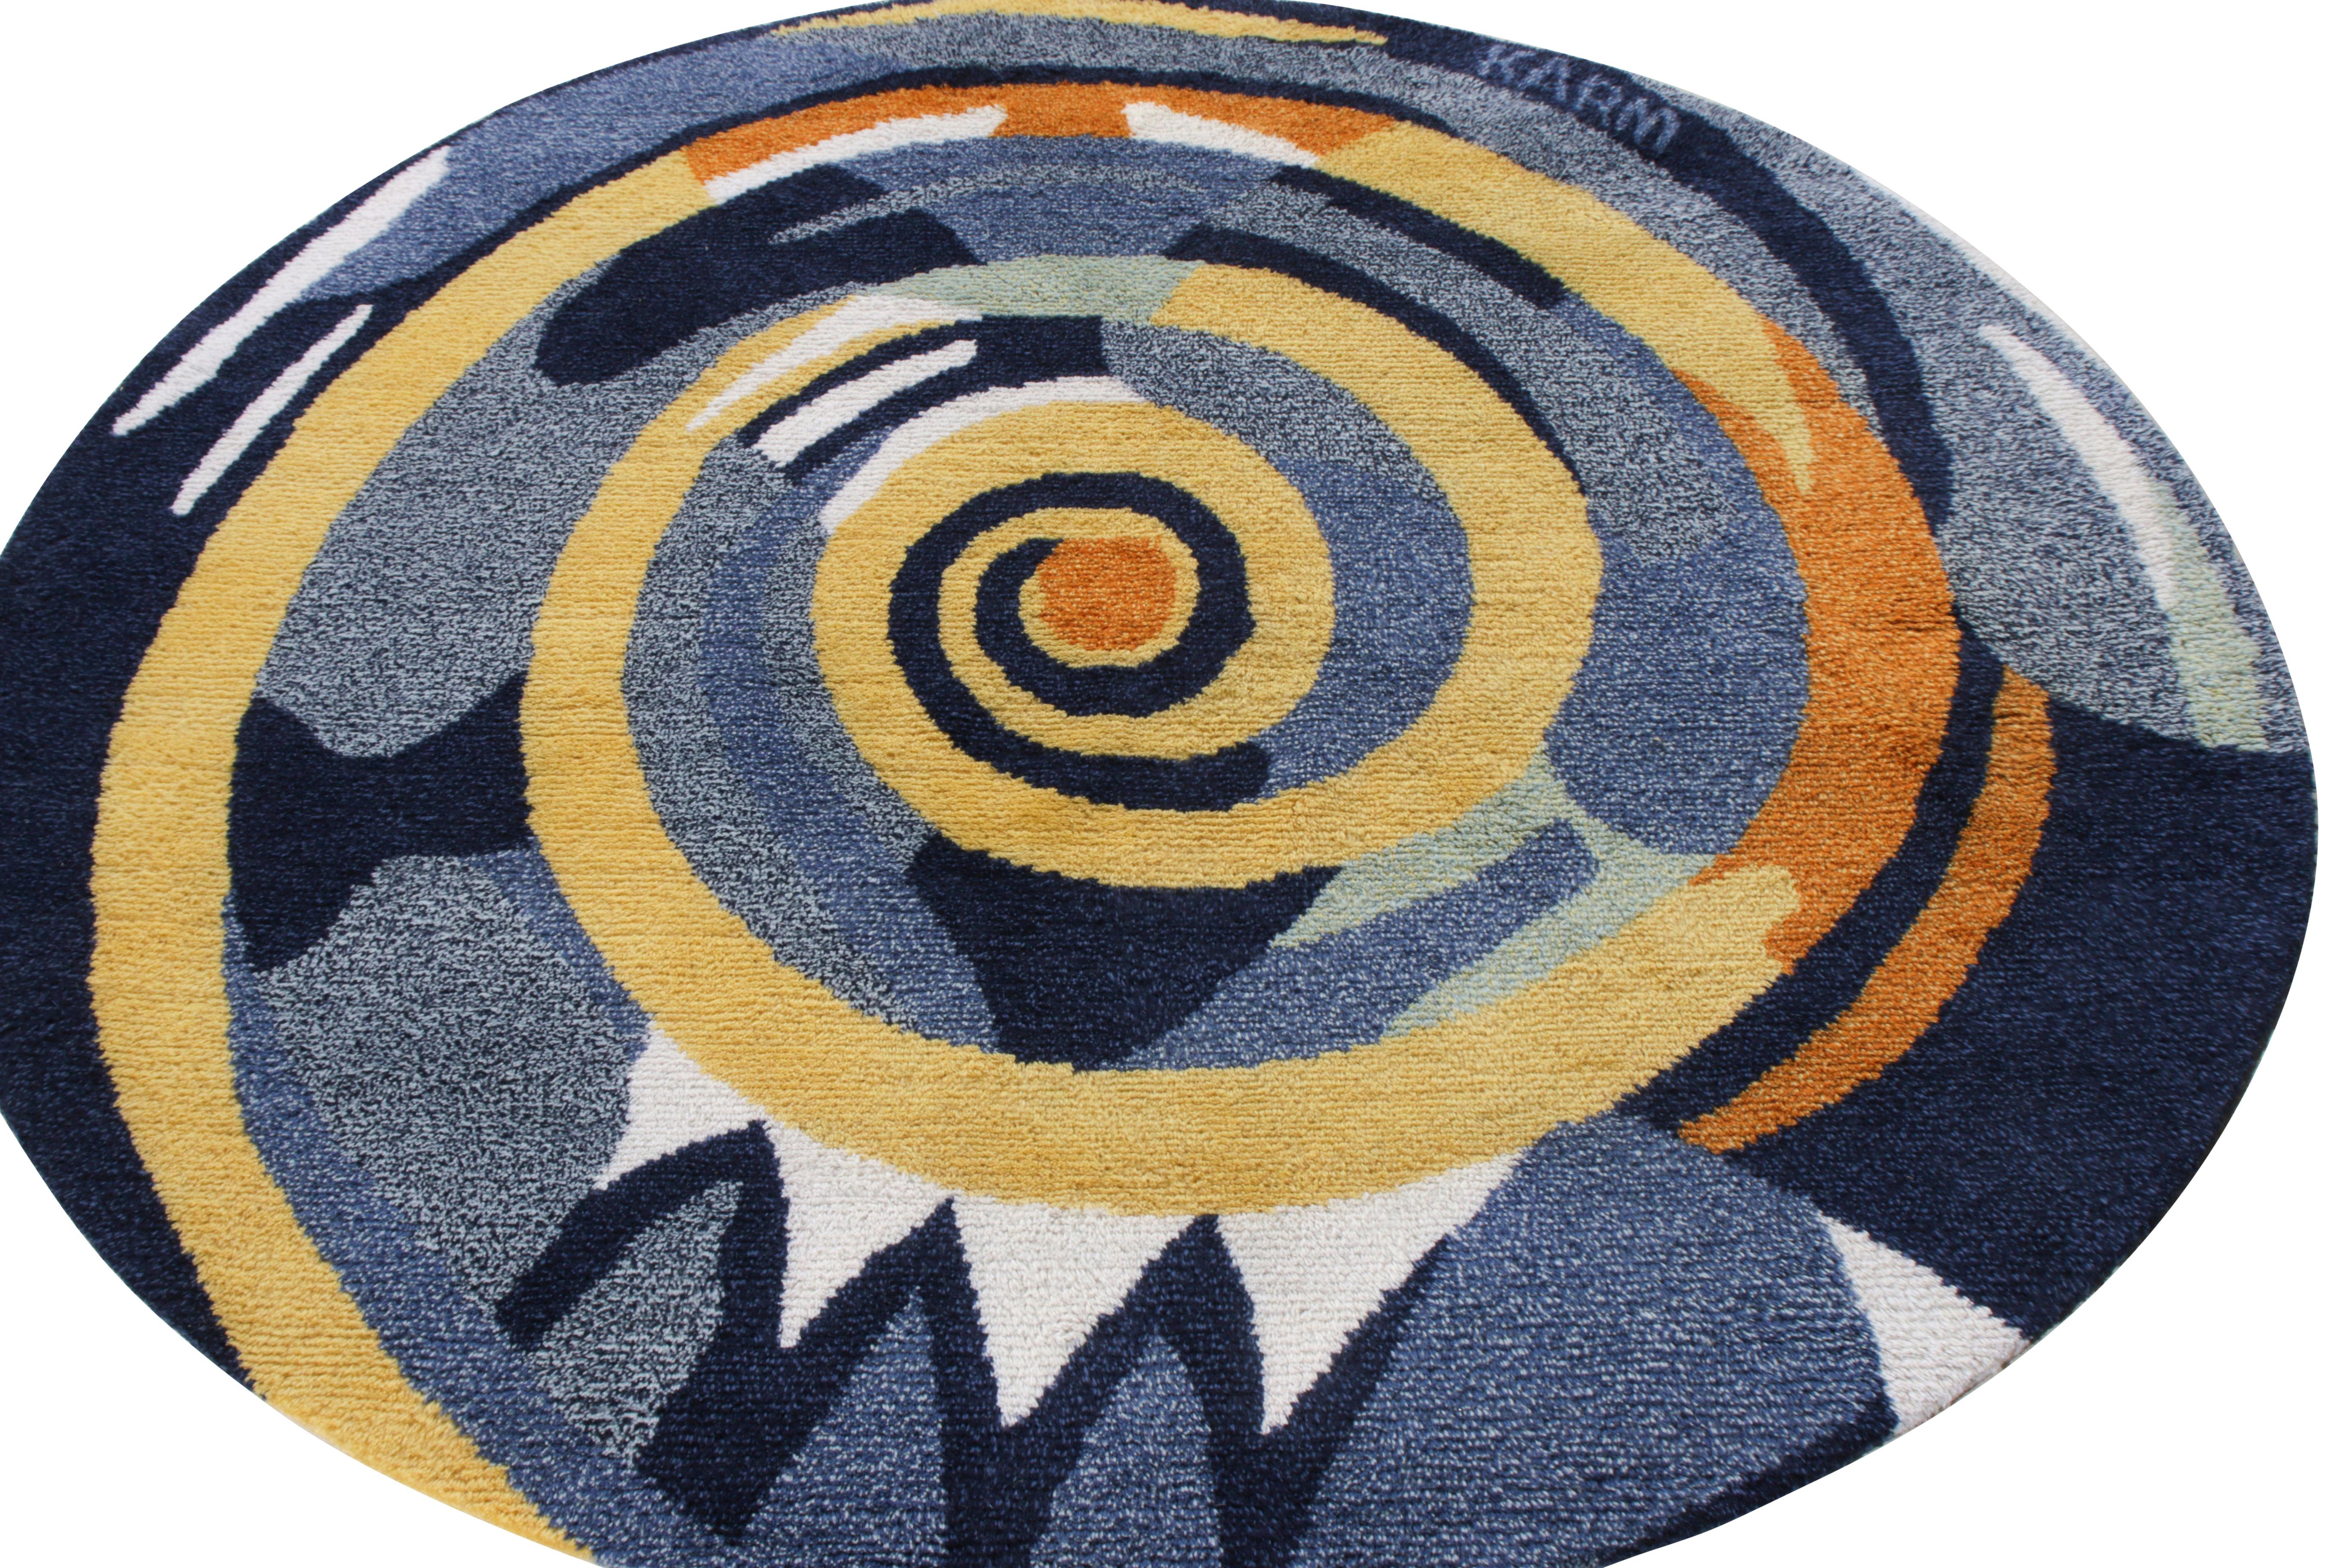 Hand knotted in wool, a 6x6 piece from Rug & Kilim’s Scandinavian Collection. This contemporary piece makes an interesting take on Swedish rya rug styles in terms of shape and concept. The circular rug witnesses a vivid abstract pattern that seems